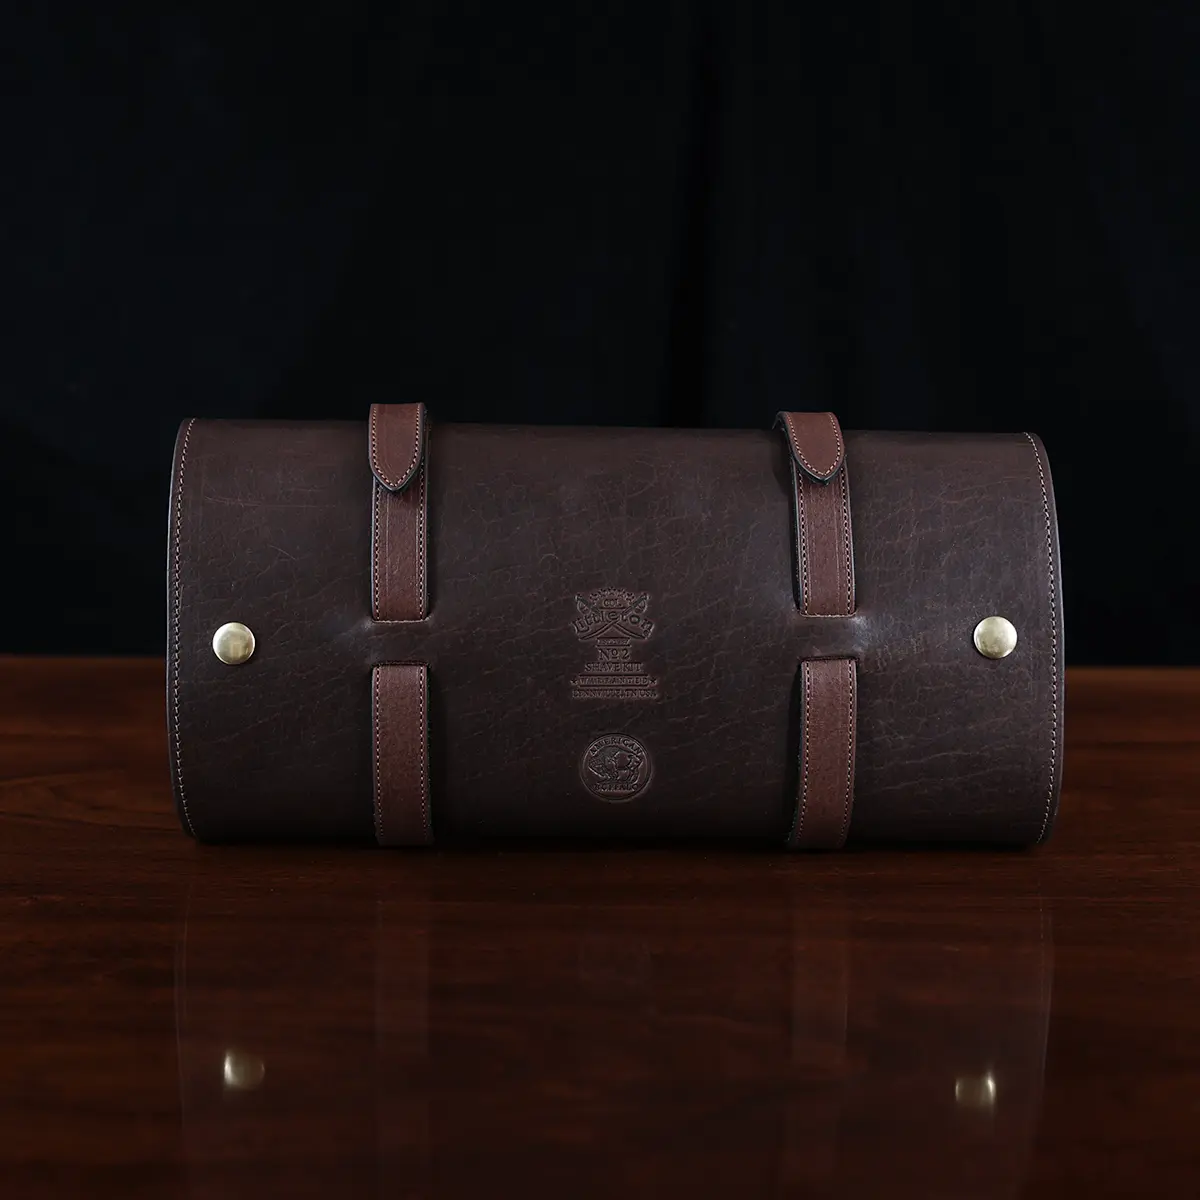 No. 2 Shave Dopp Kit in tobacco buffalo with No. 8 Khaki Cotton Canvas Lining - back view on a wooden table